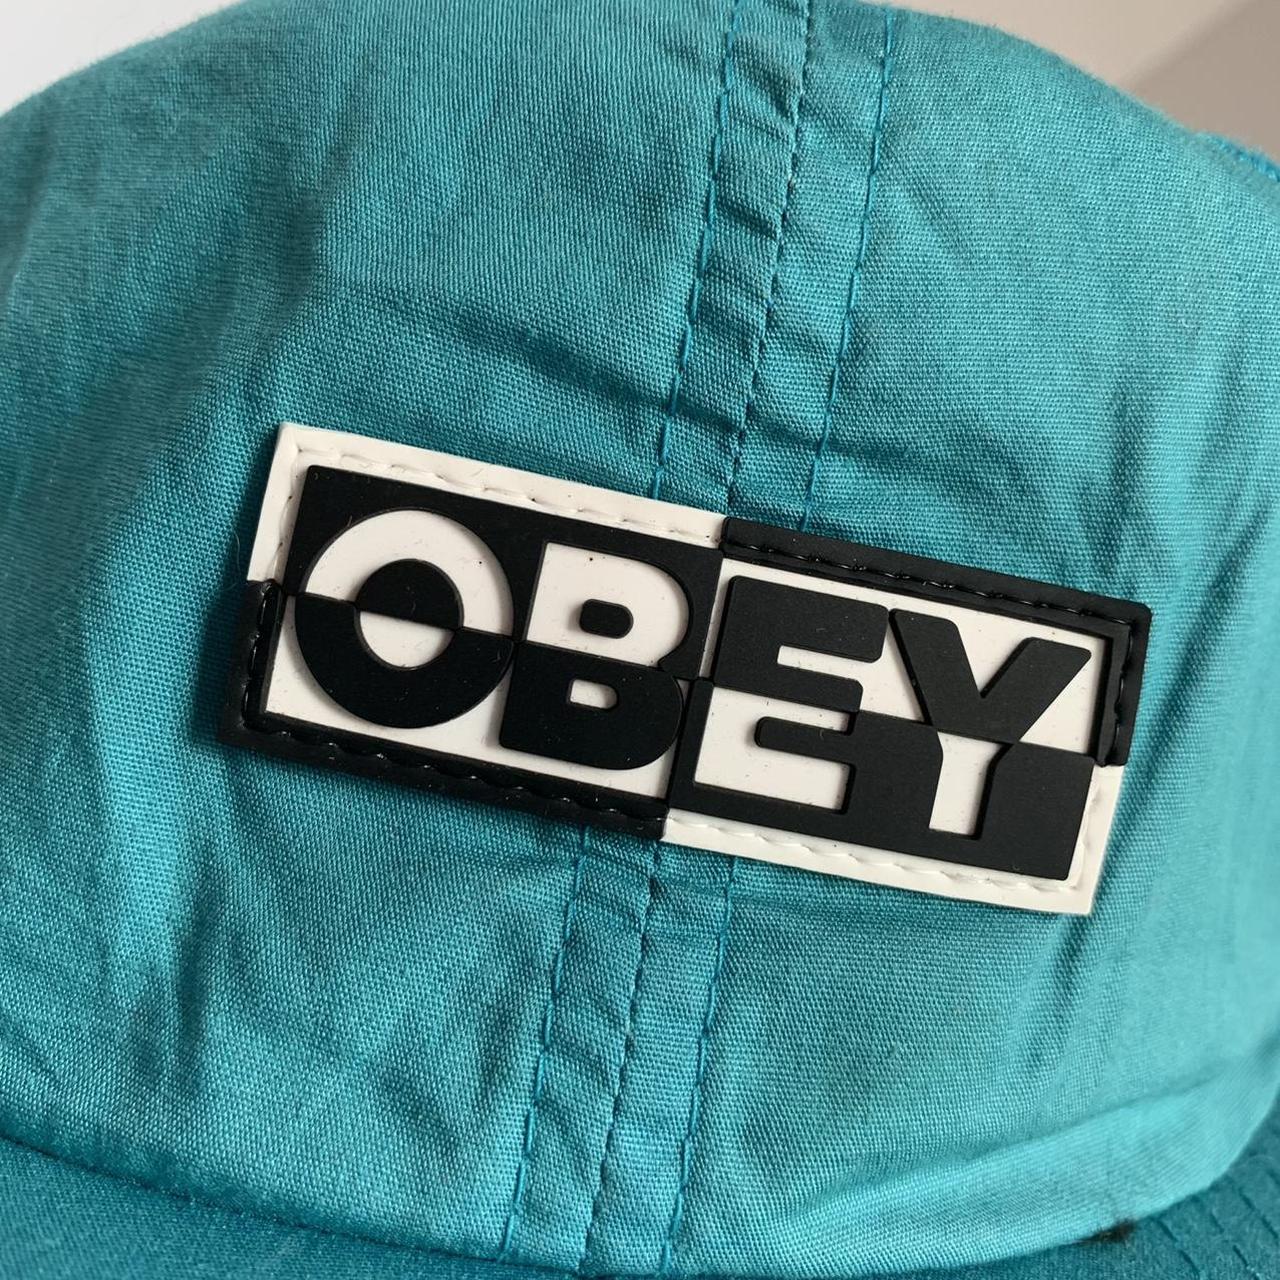 Product Image 2 - OBEY
Size: OS
Style: Buckle
Color: Blue /